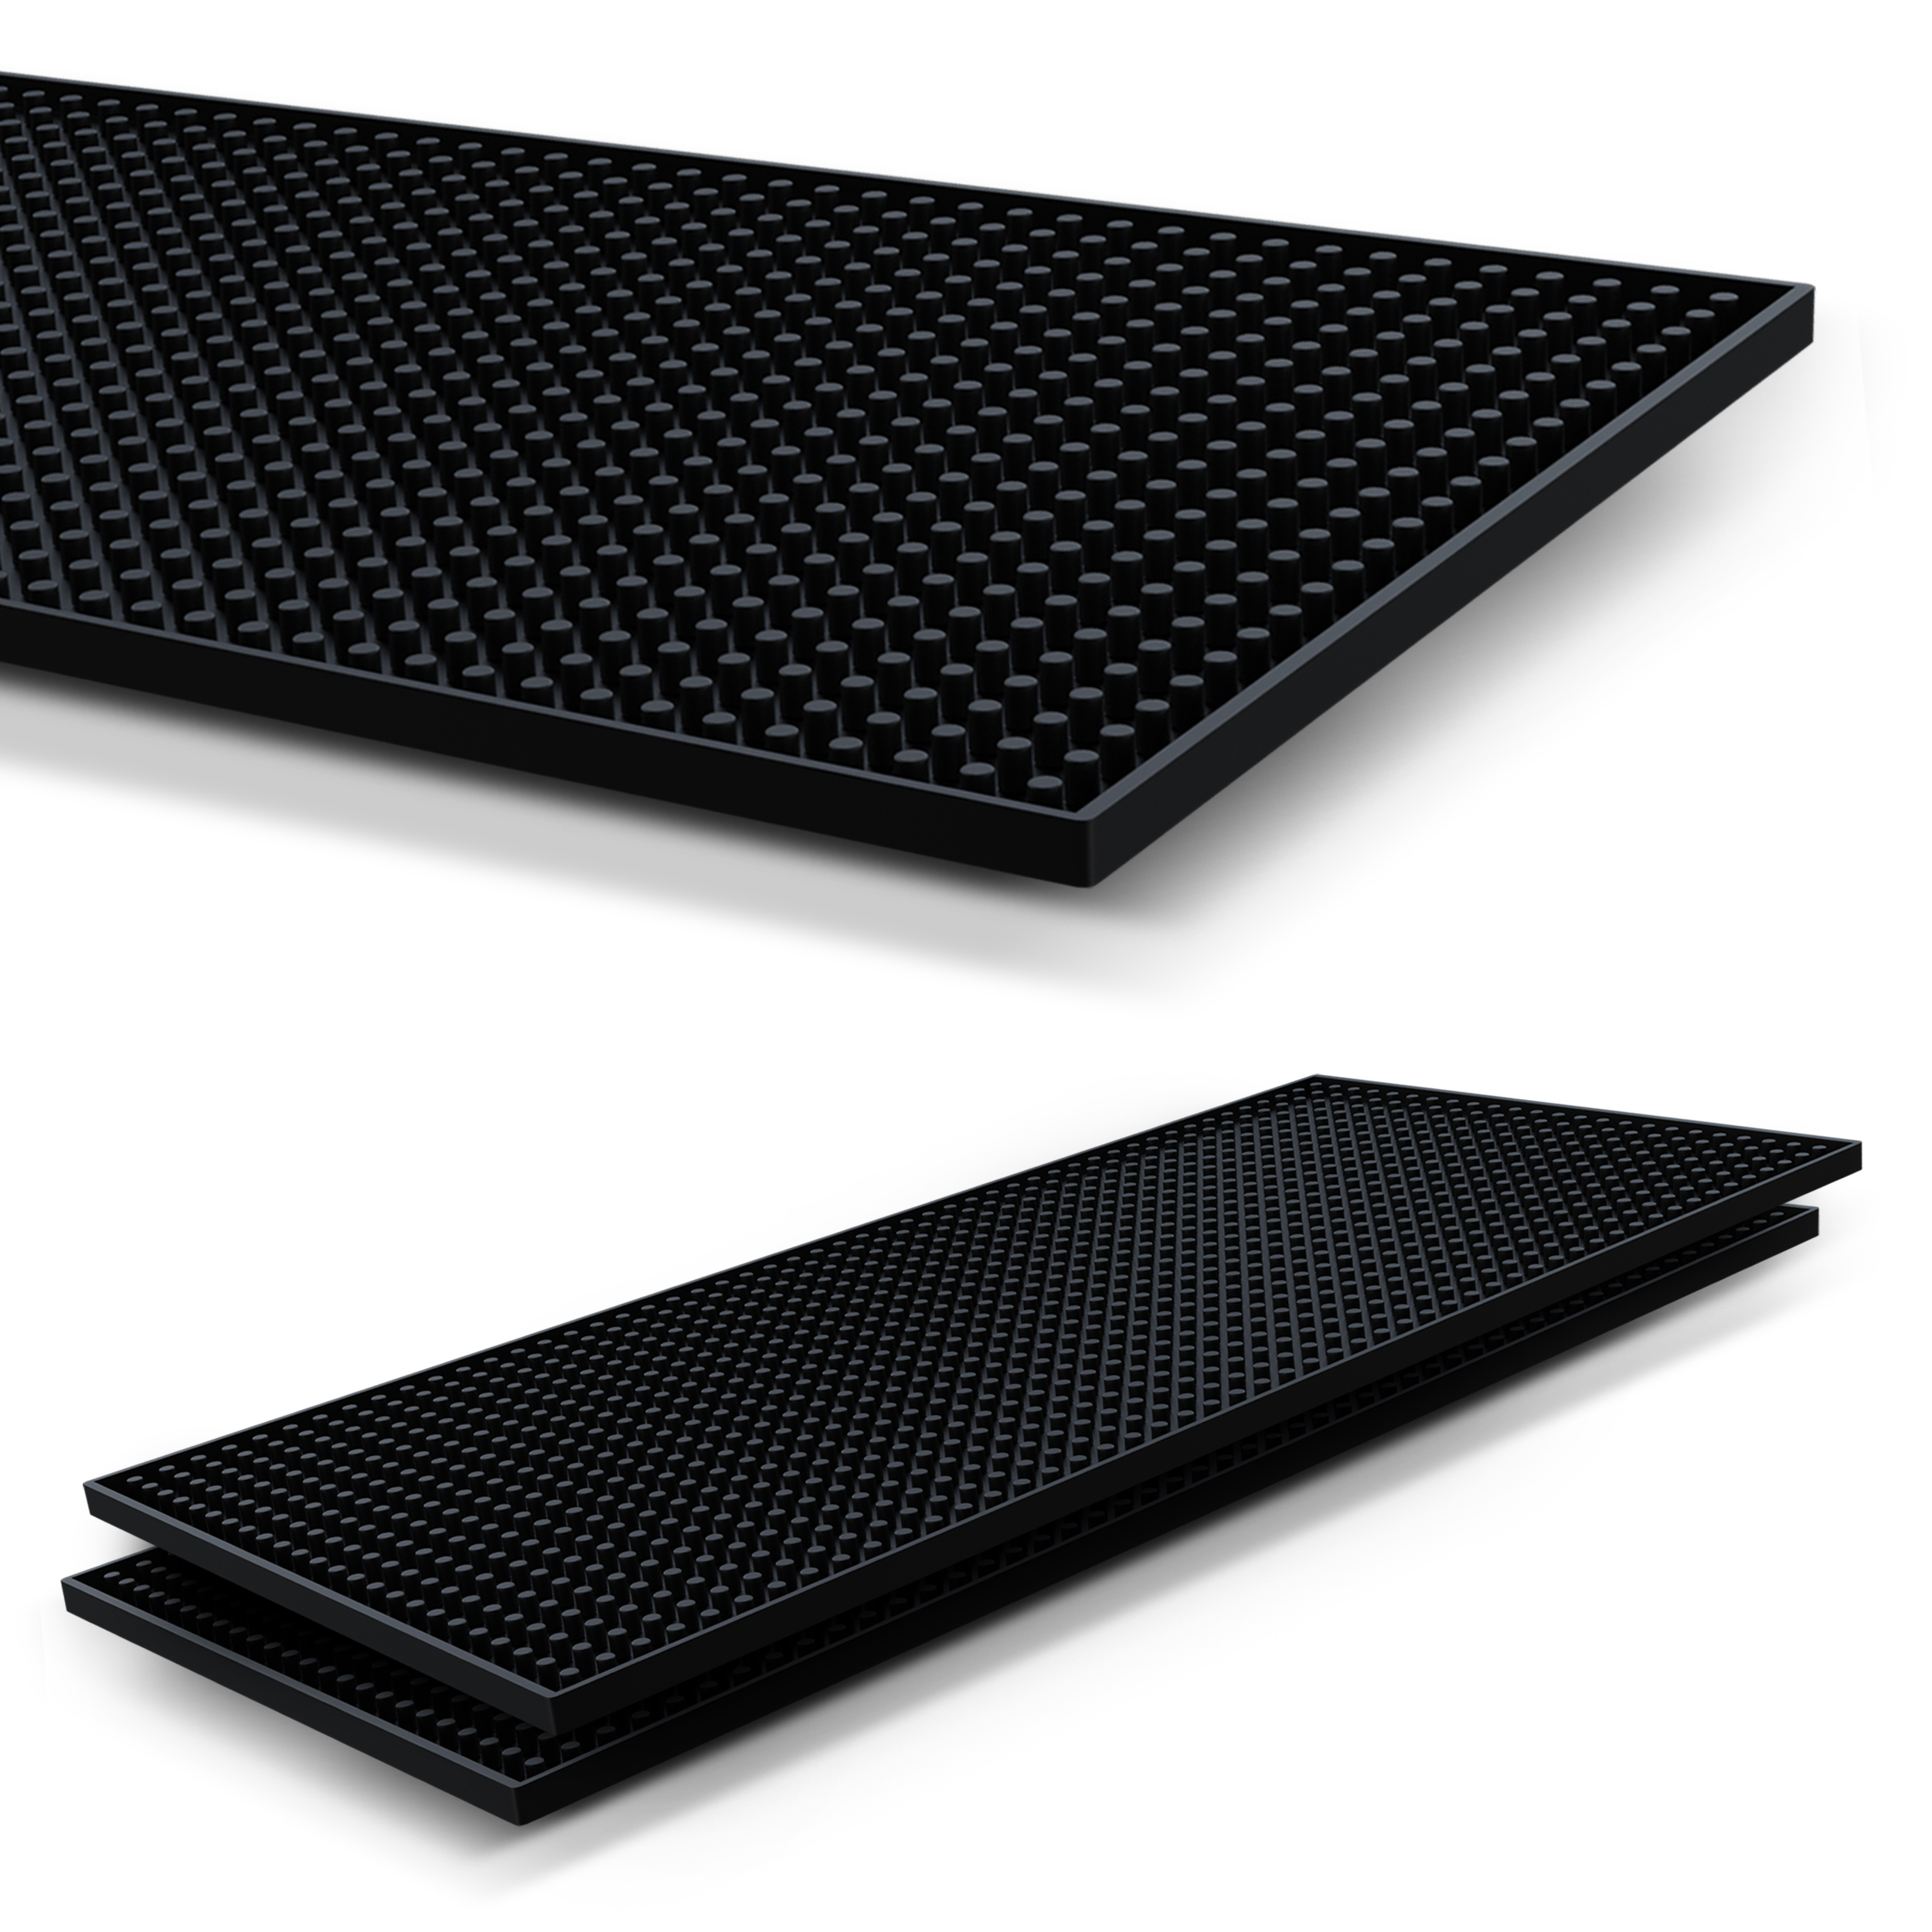 Featured image for “Esatto 6” x 12” – 2 Piece Black Shaker Mat (SHAMAT) – Durable and Environmental Professional Bar Mat”